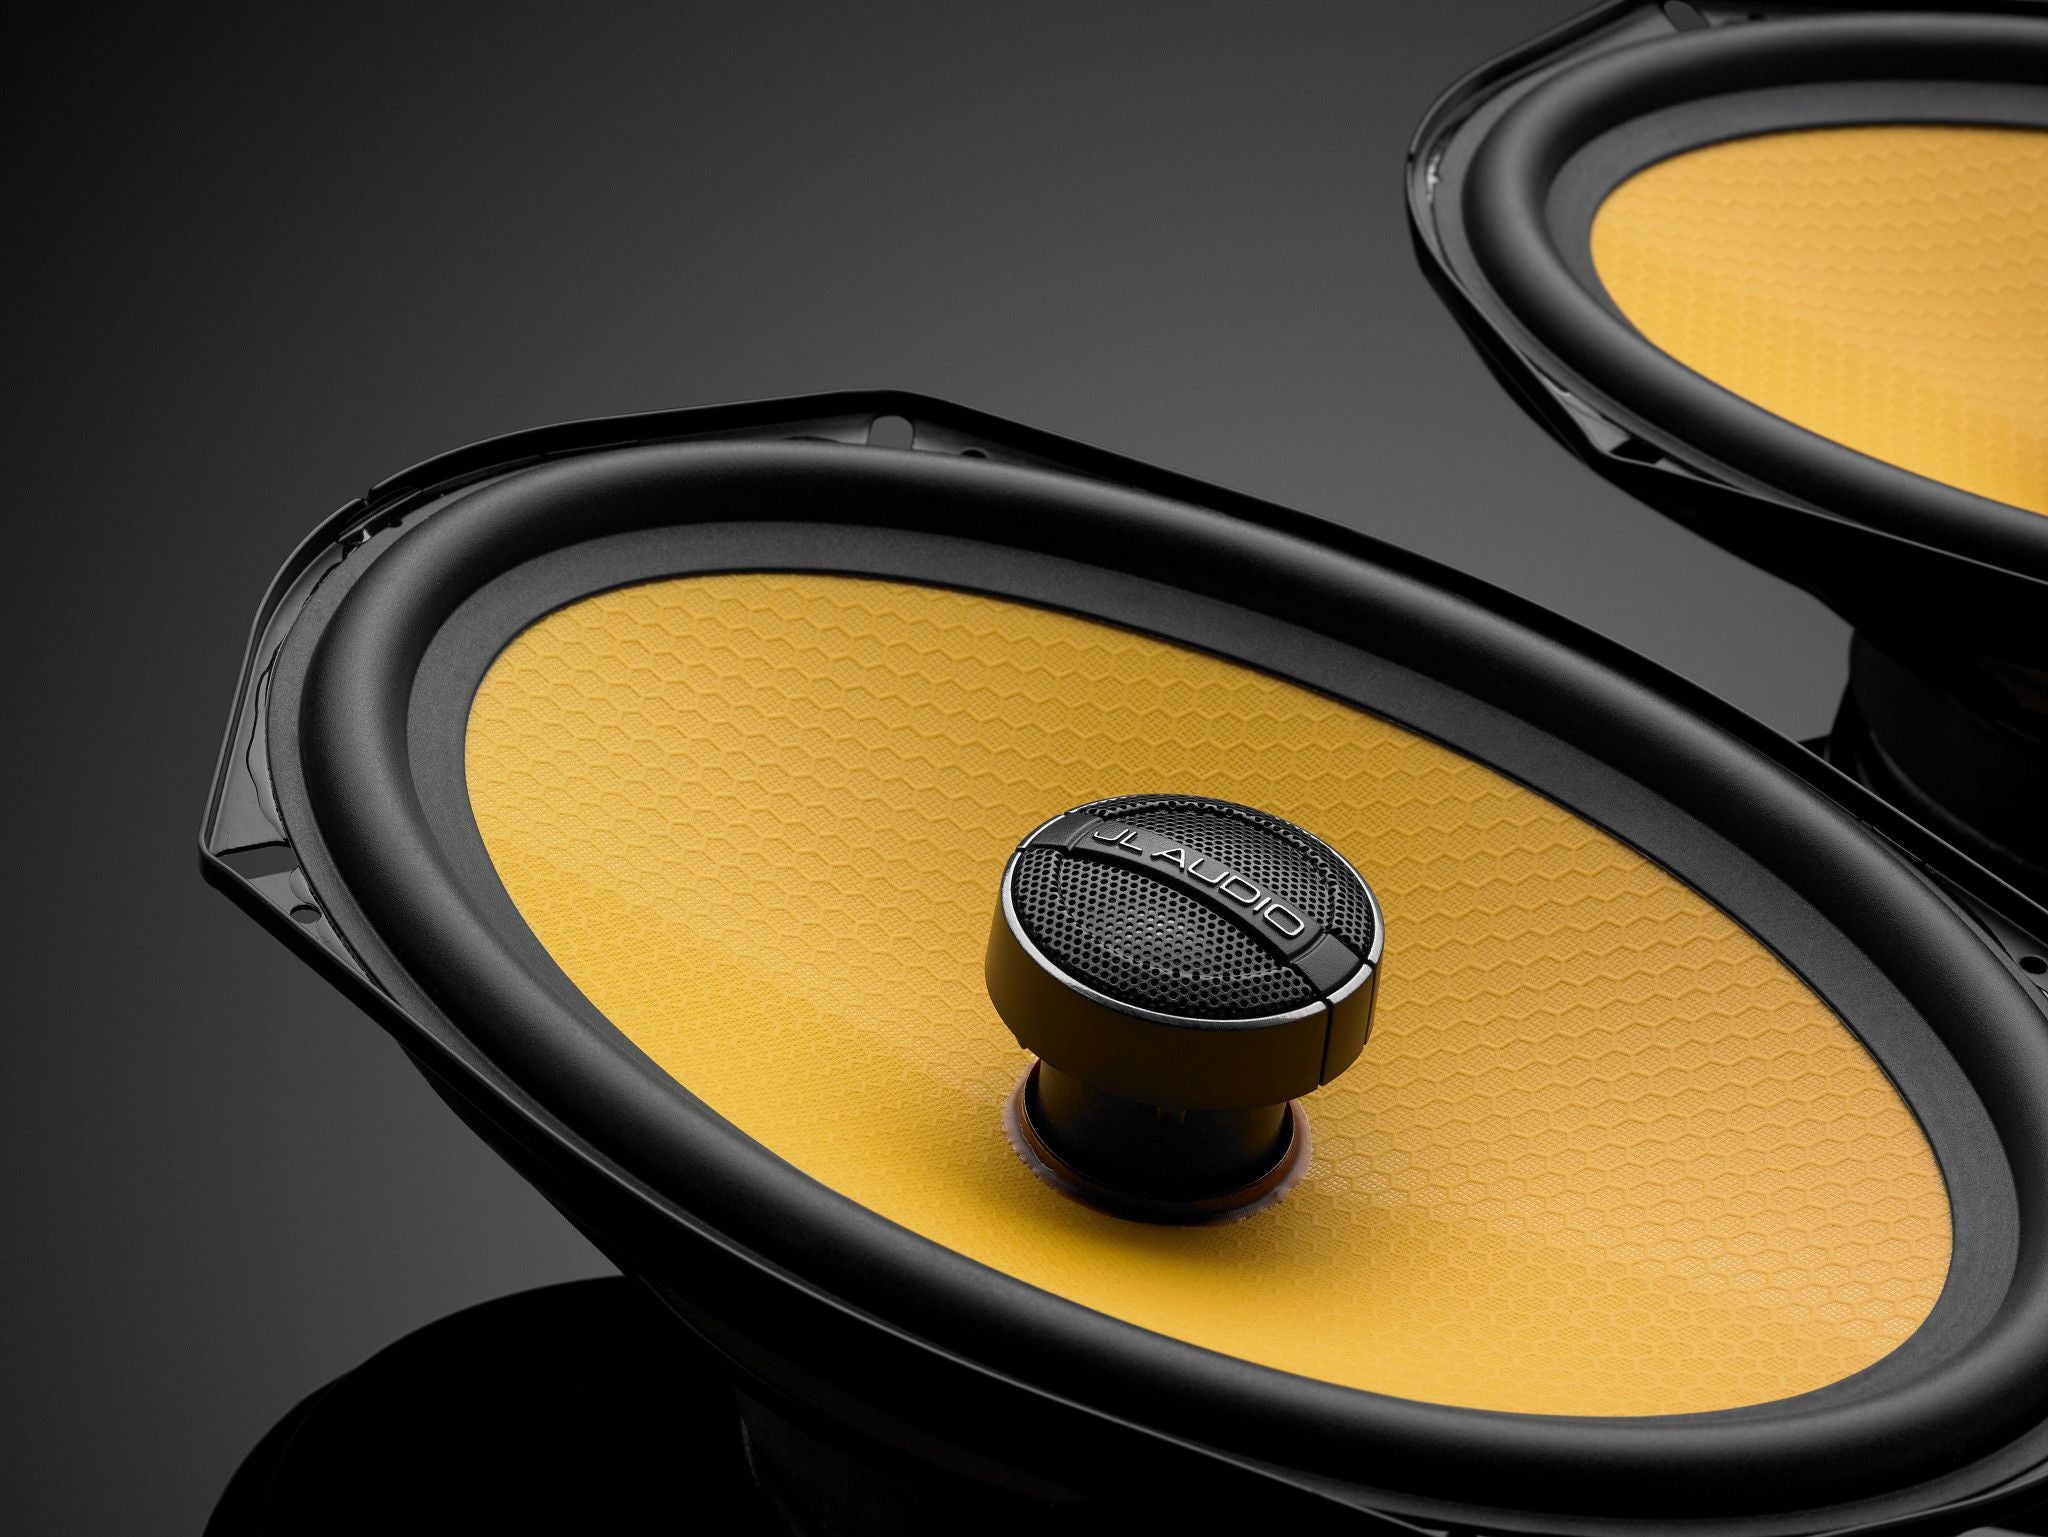 Detail of C1-690x Coaxial Speakers